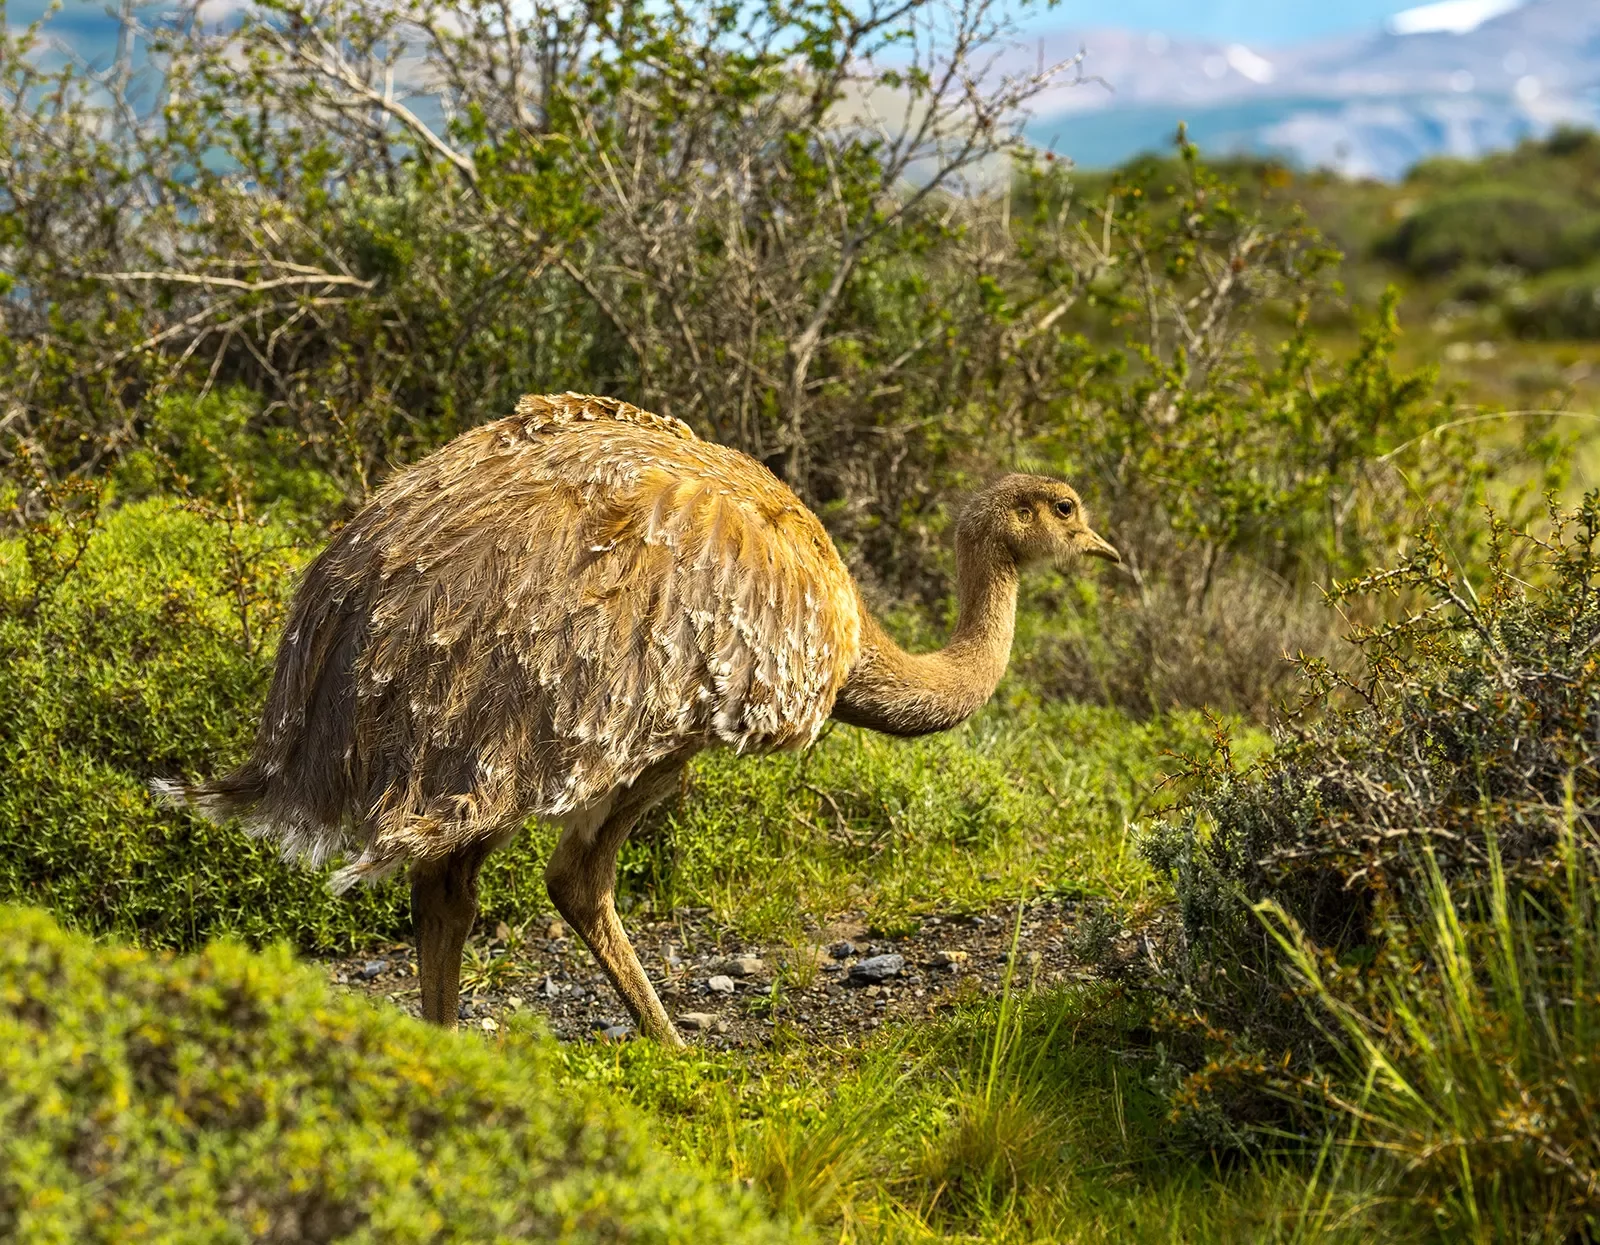 Brown ostrich in the middle of a grassy field